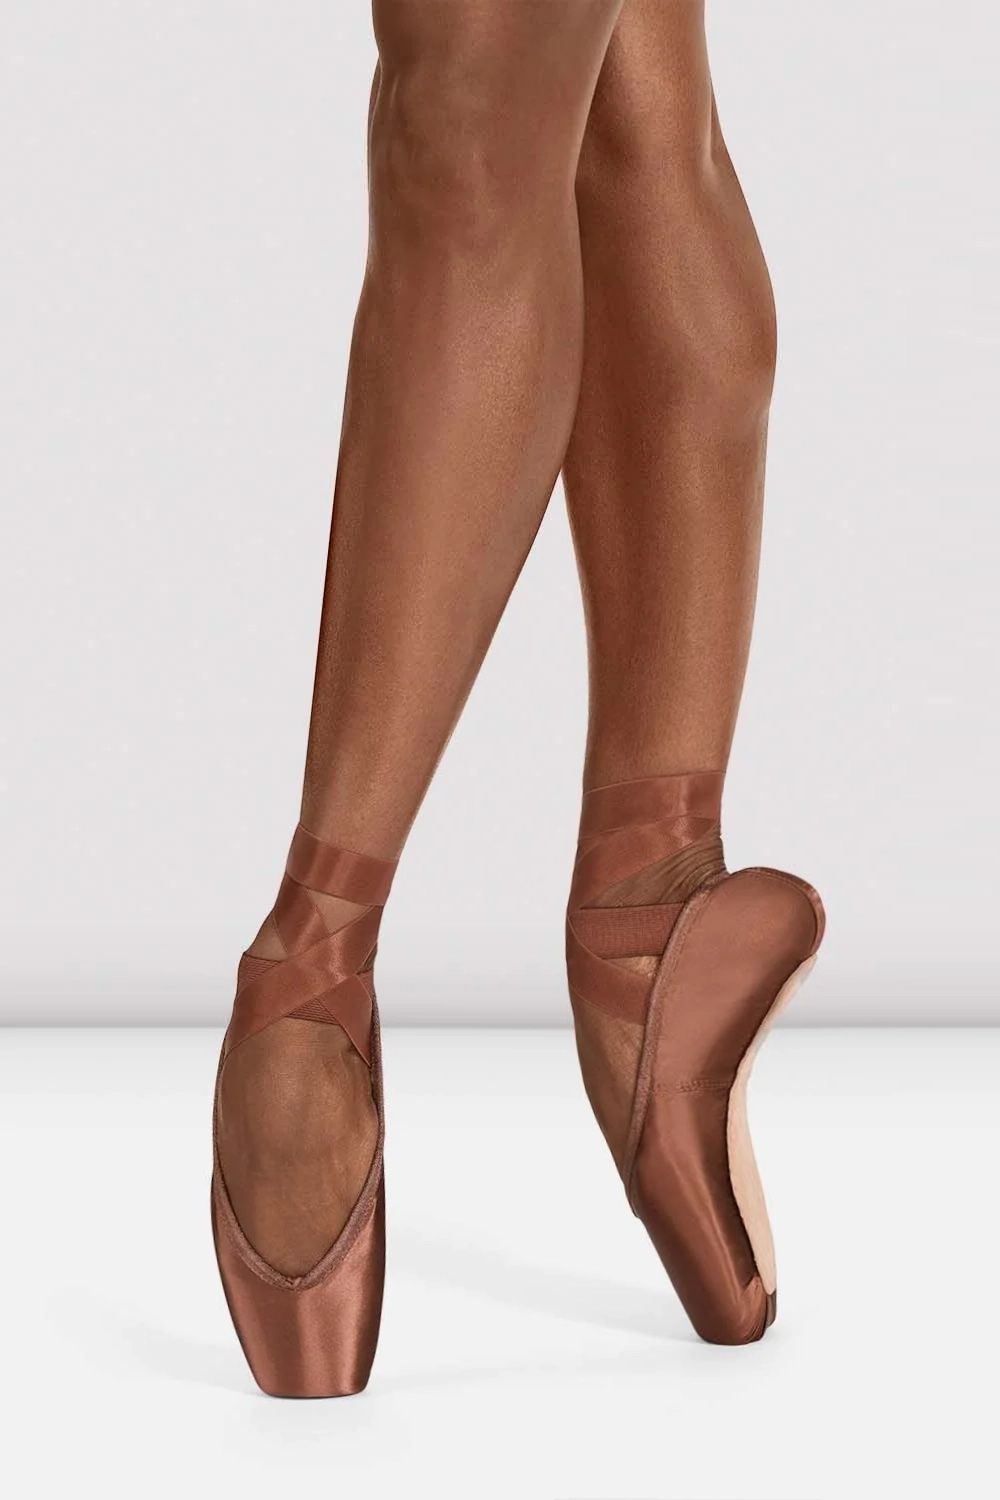 BLOCH Heritage Pointe Shoes, B29 Satin